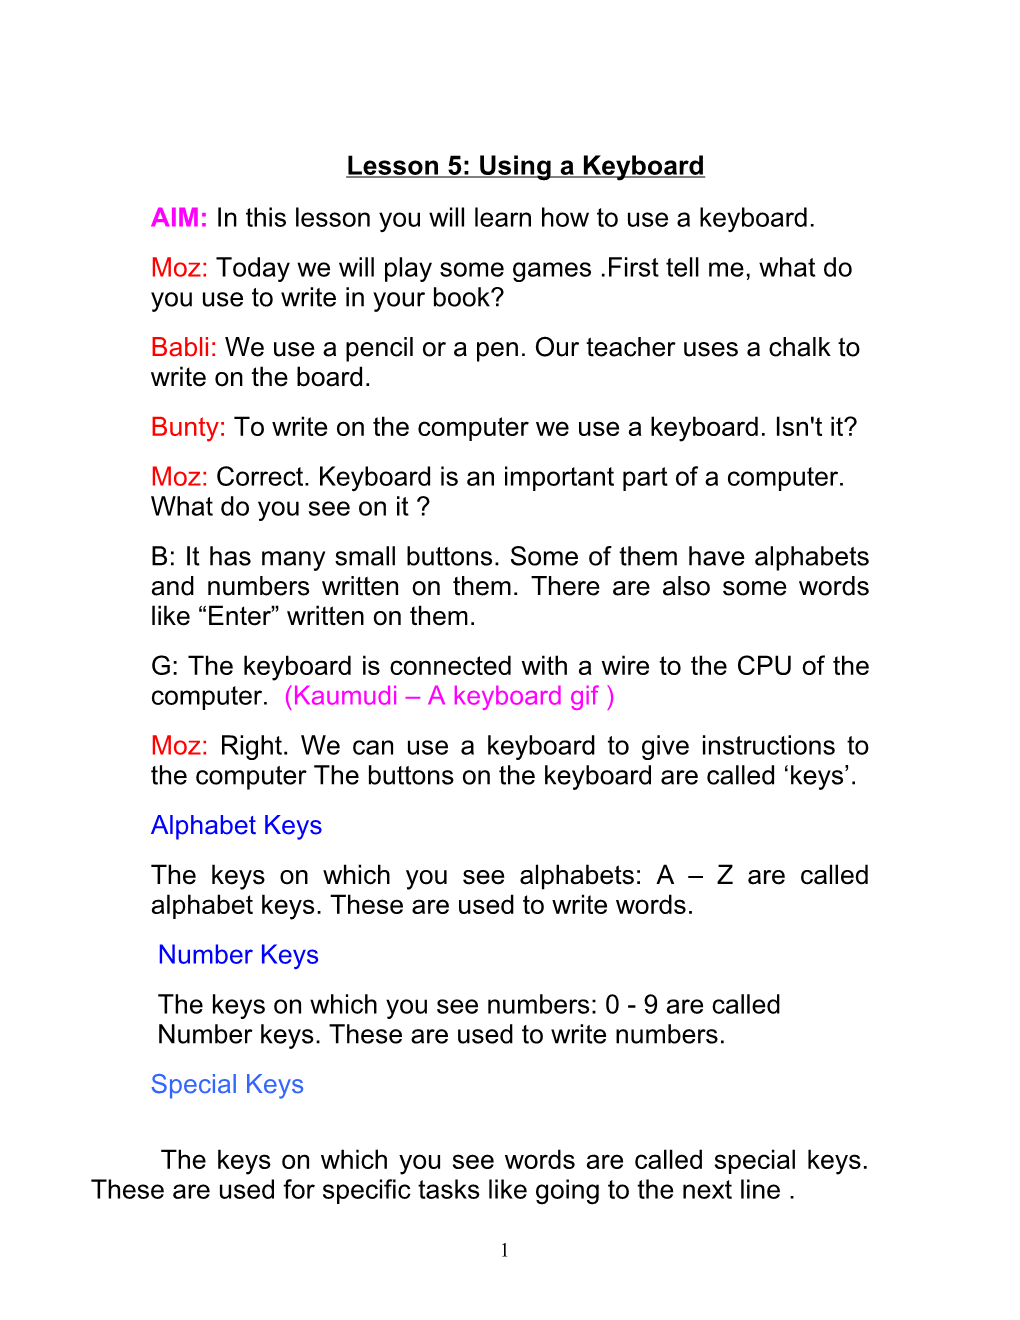 AIM: in This Lesson You Will Learn How to Use a Keyboard